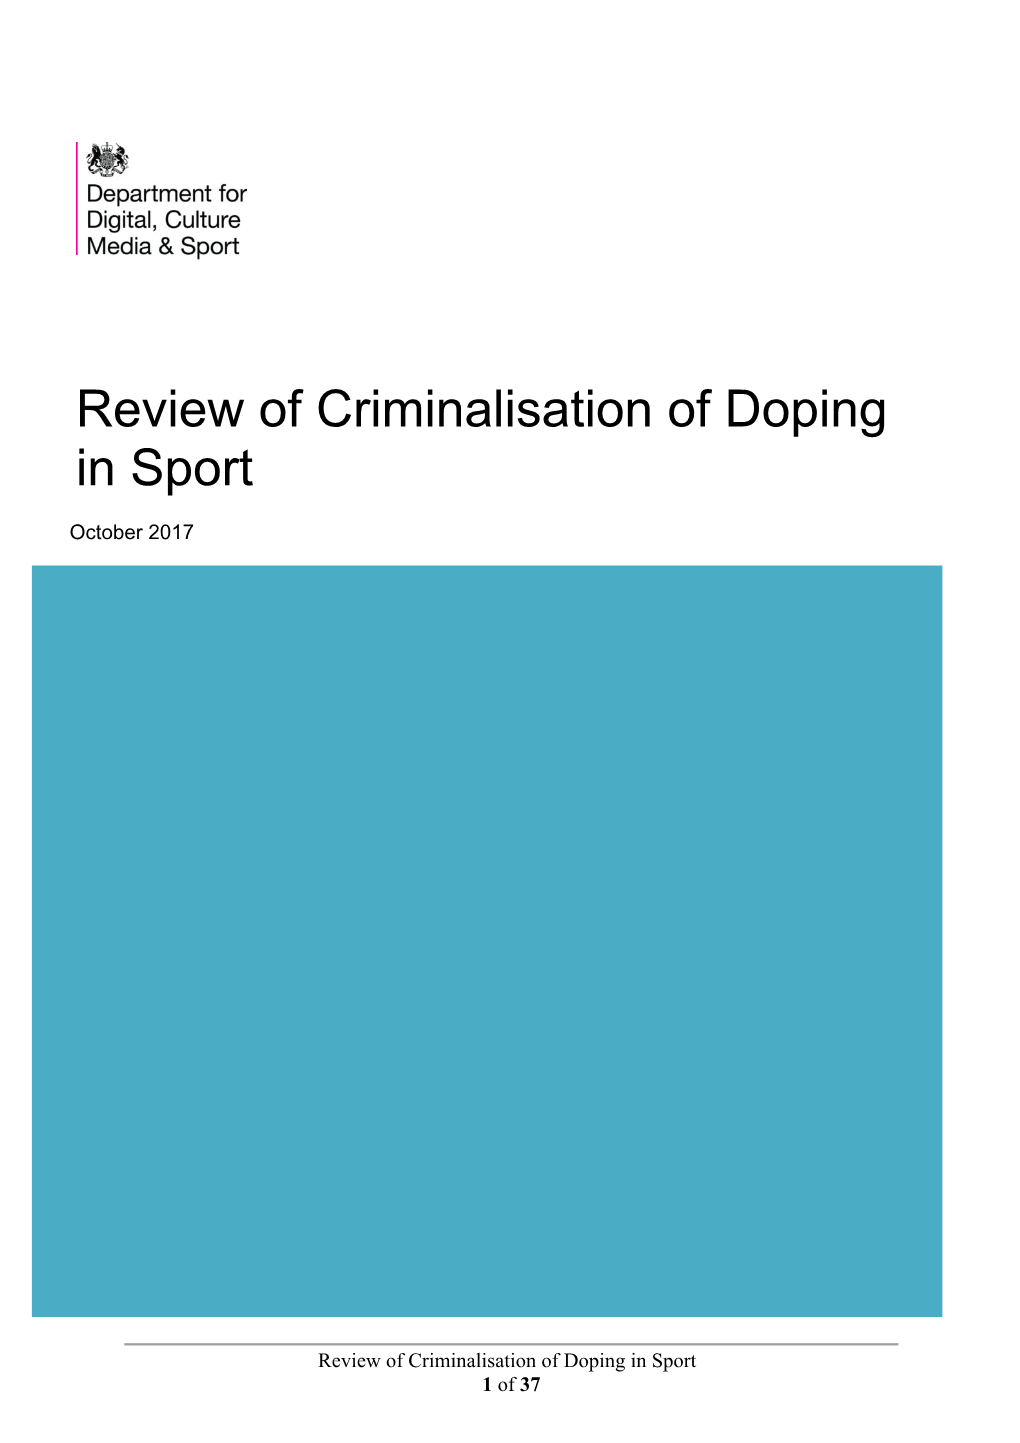 Review of Criminalisation of Doping in Sport